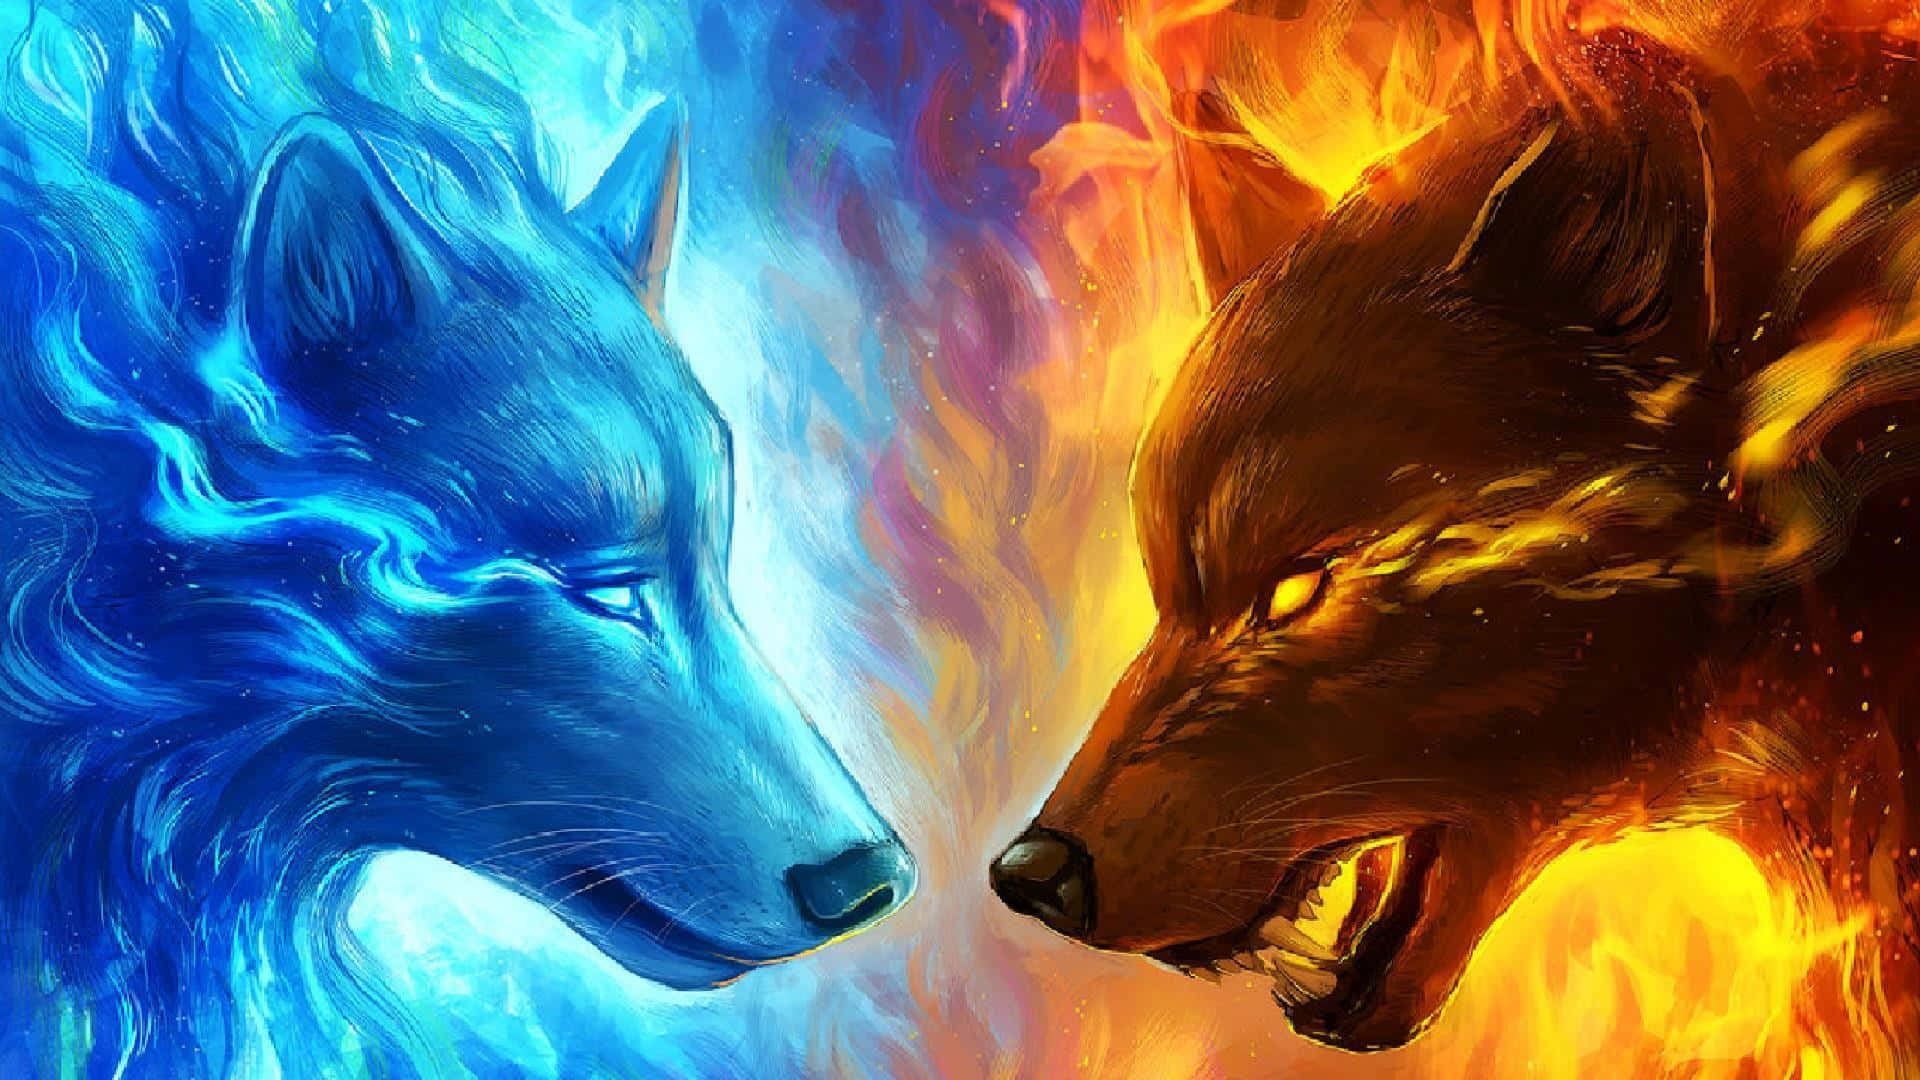 "A Wolf of Two Worlds - Water and Fire" Wallpaper